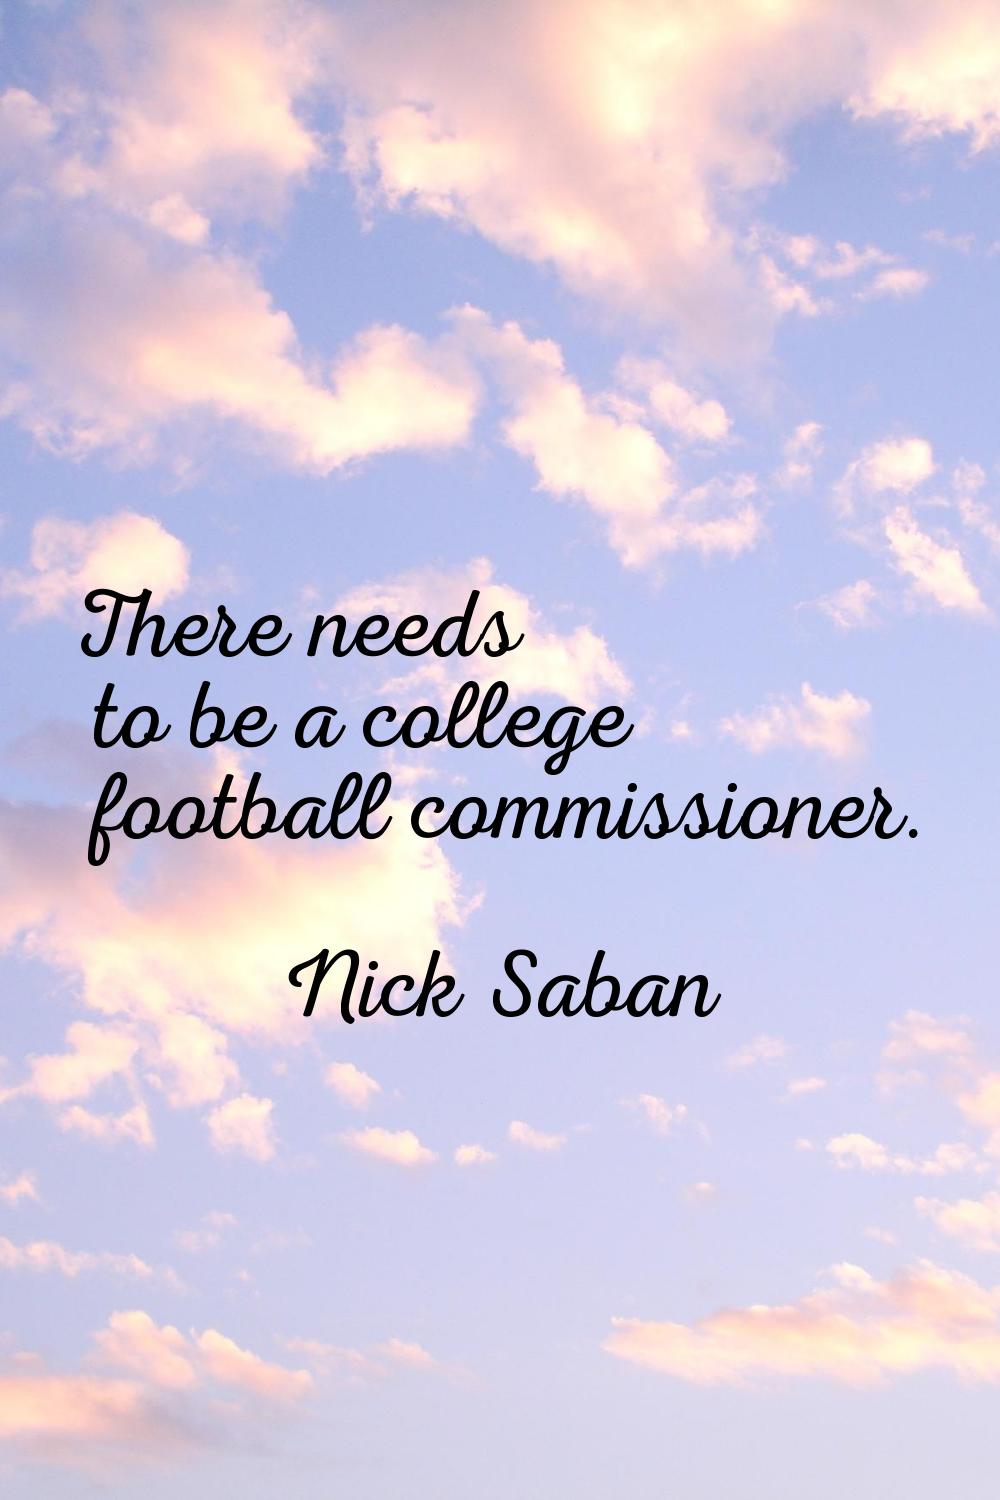 There needs to be a college football commissioner.